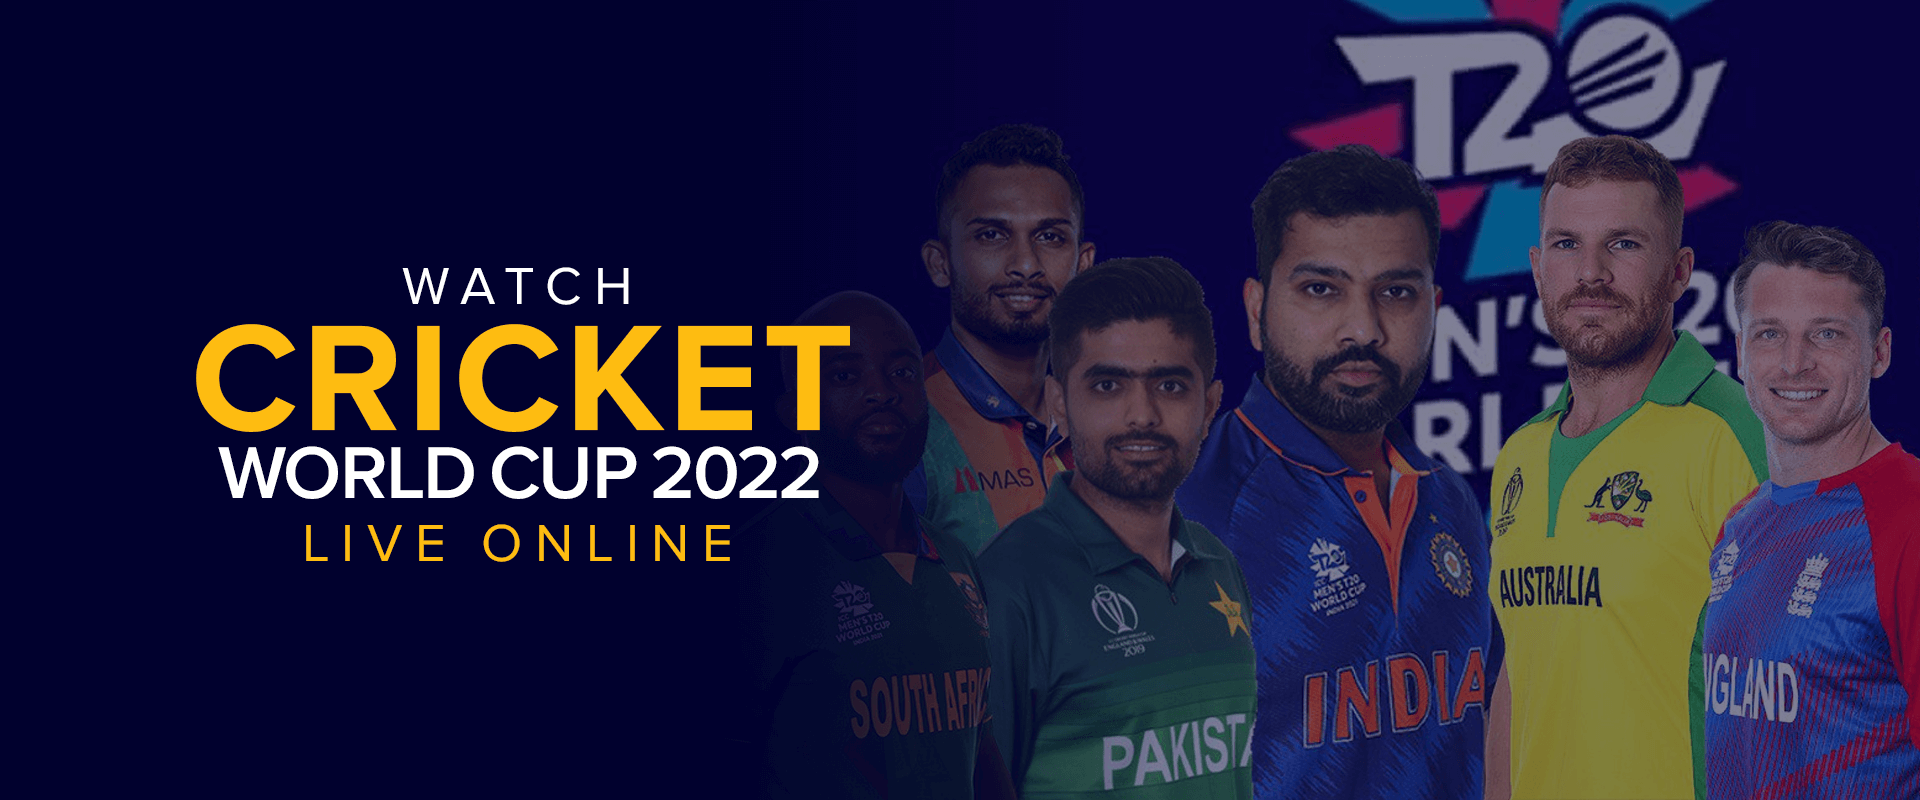 t20 world cup 2022 live watch online